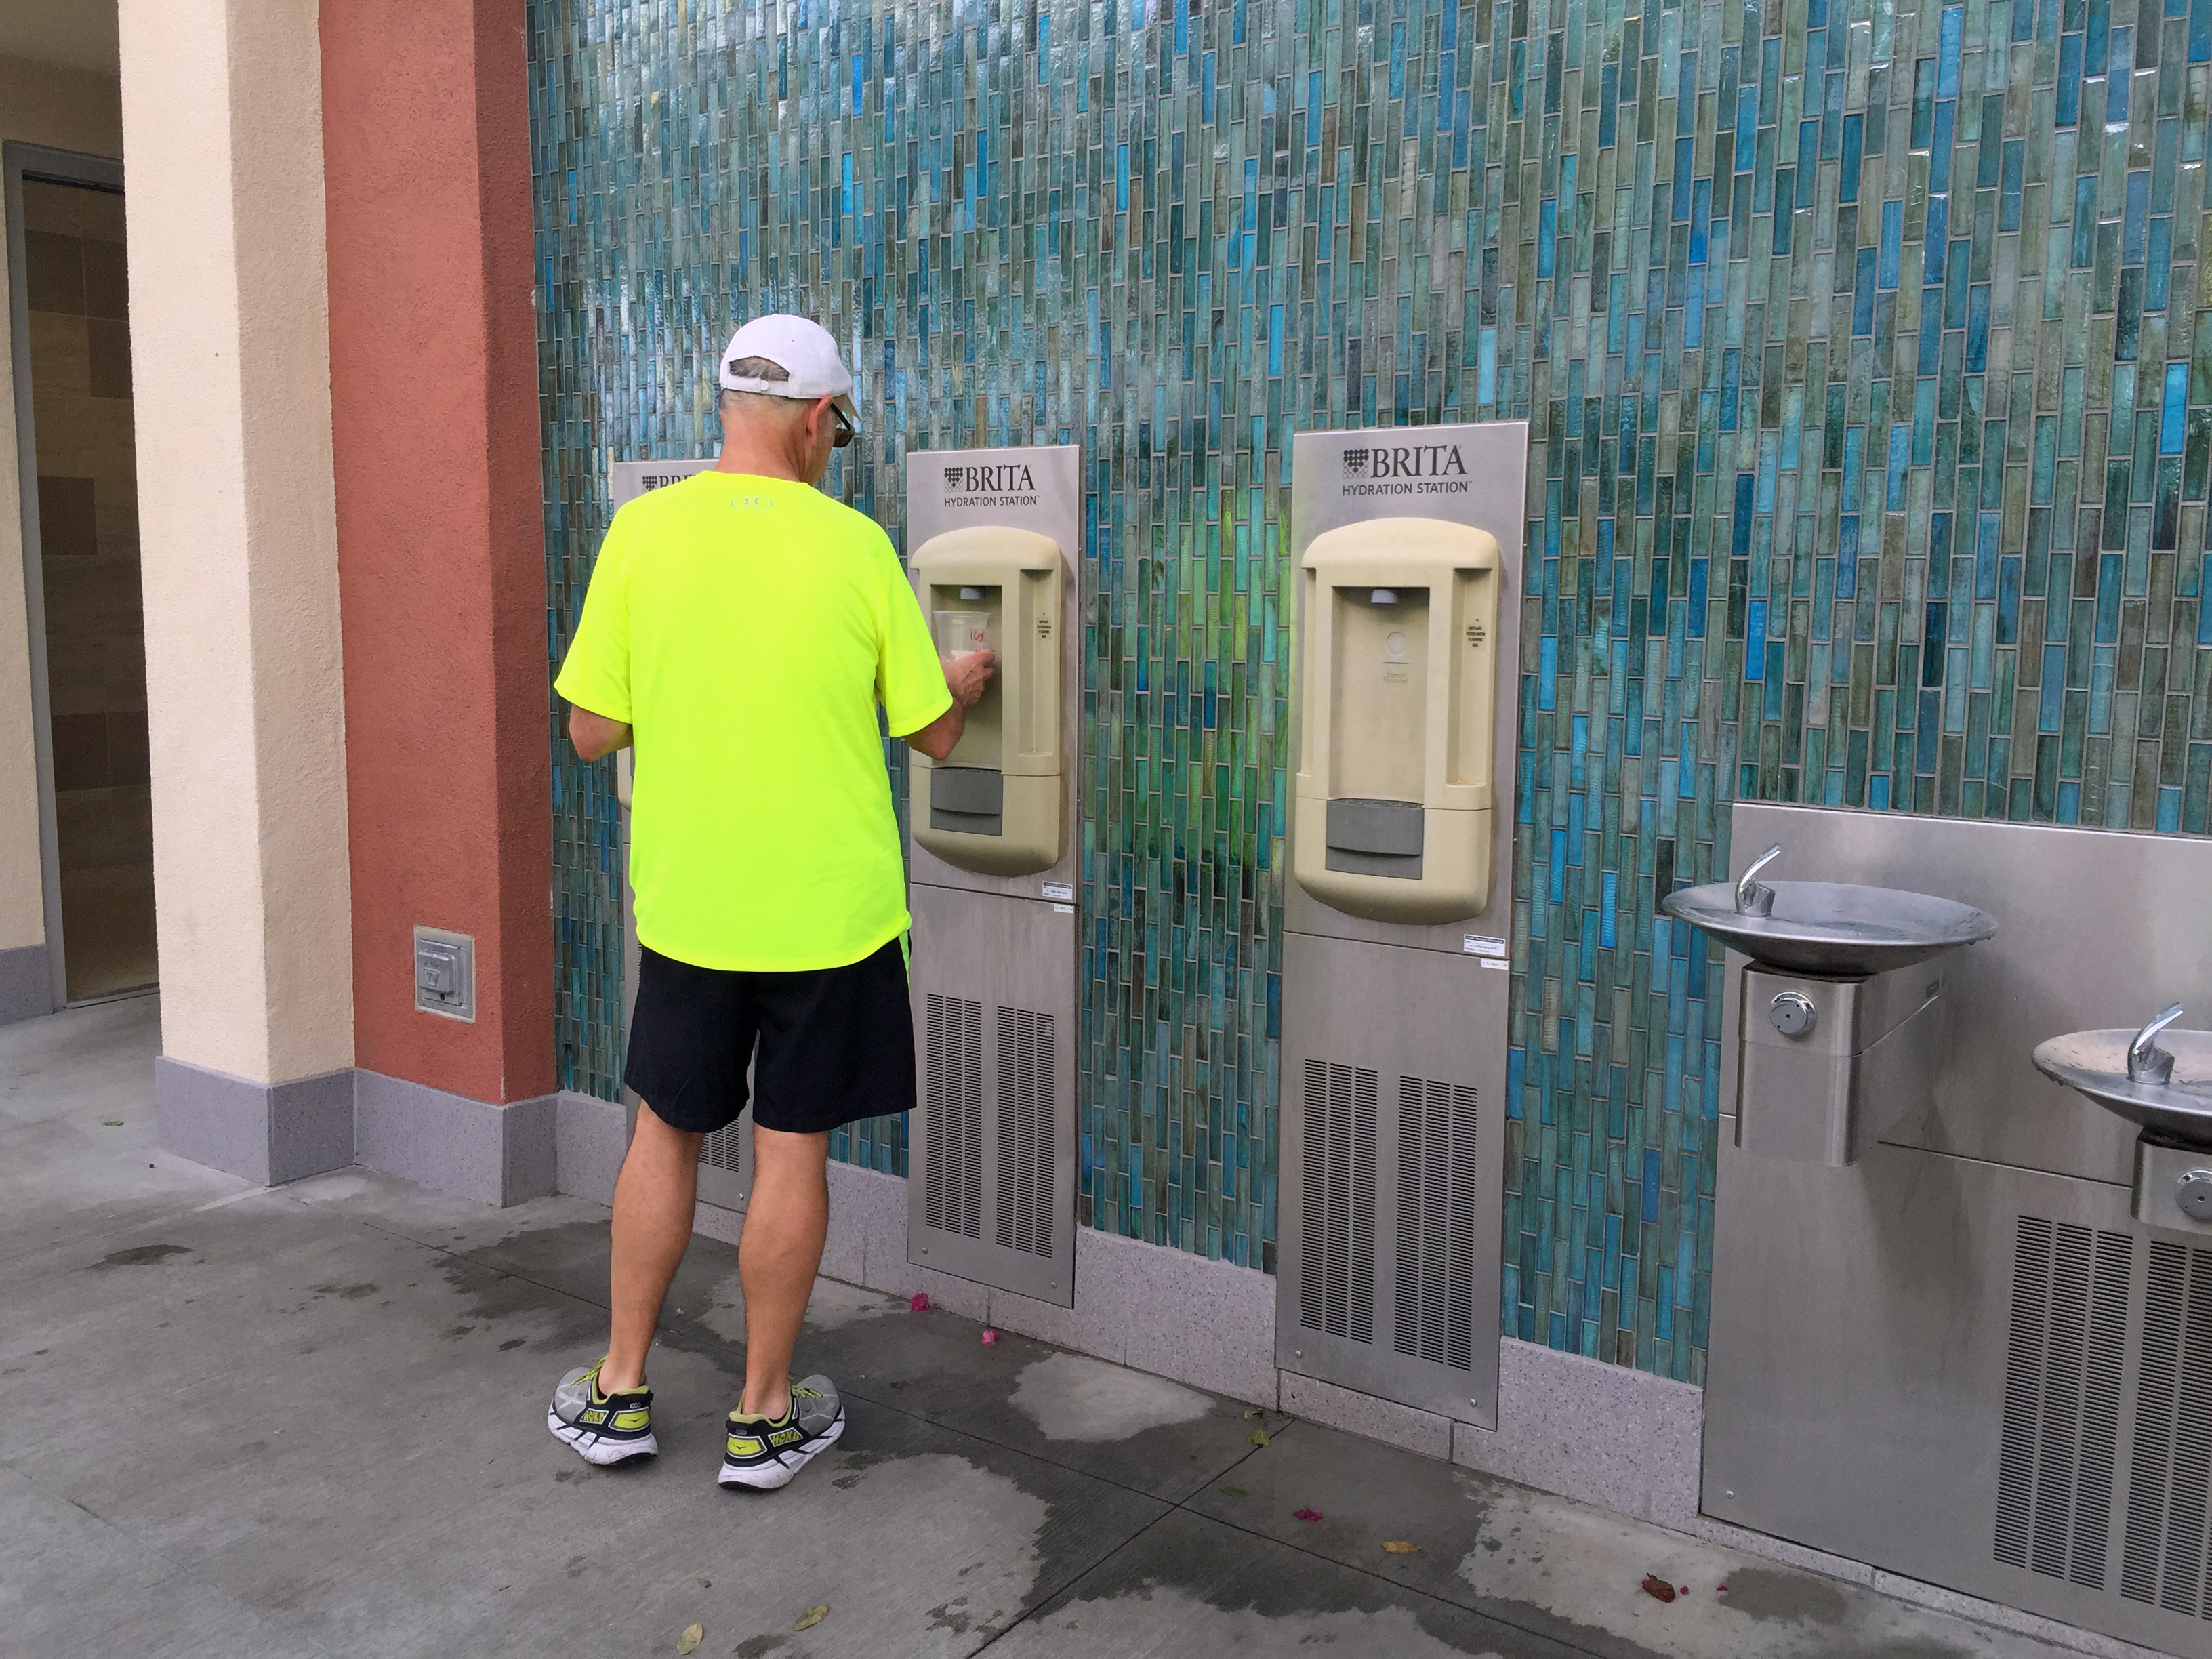 Among the enhancements for fans was a series of new hydration stations outside Stadium 2.